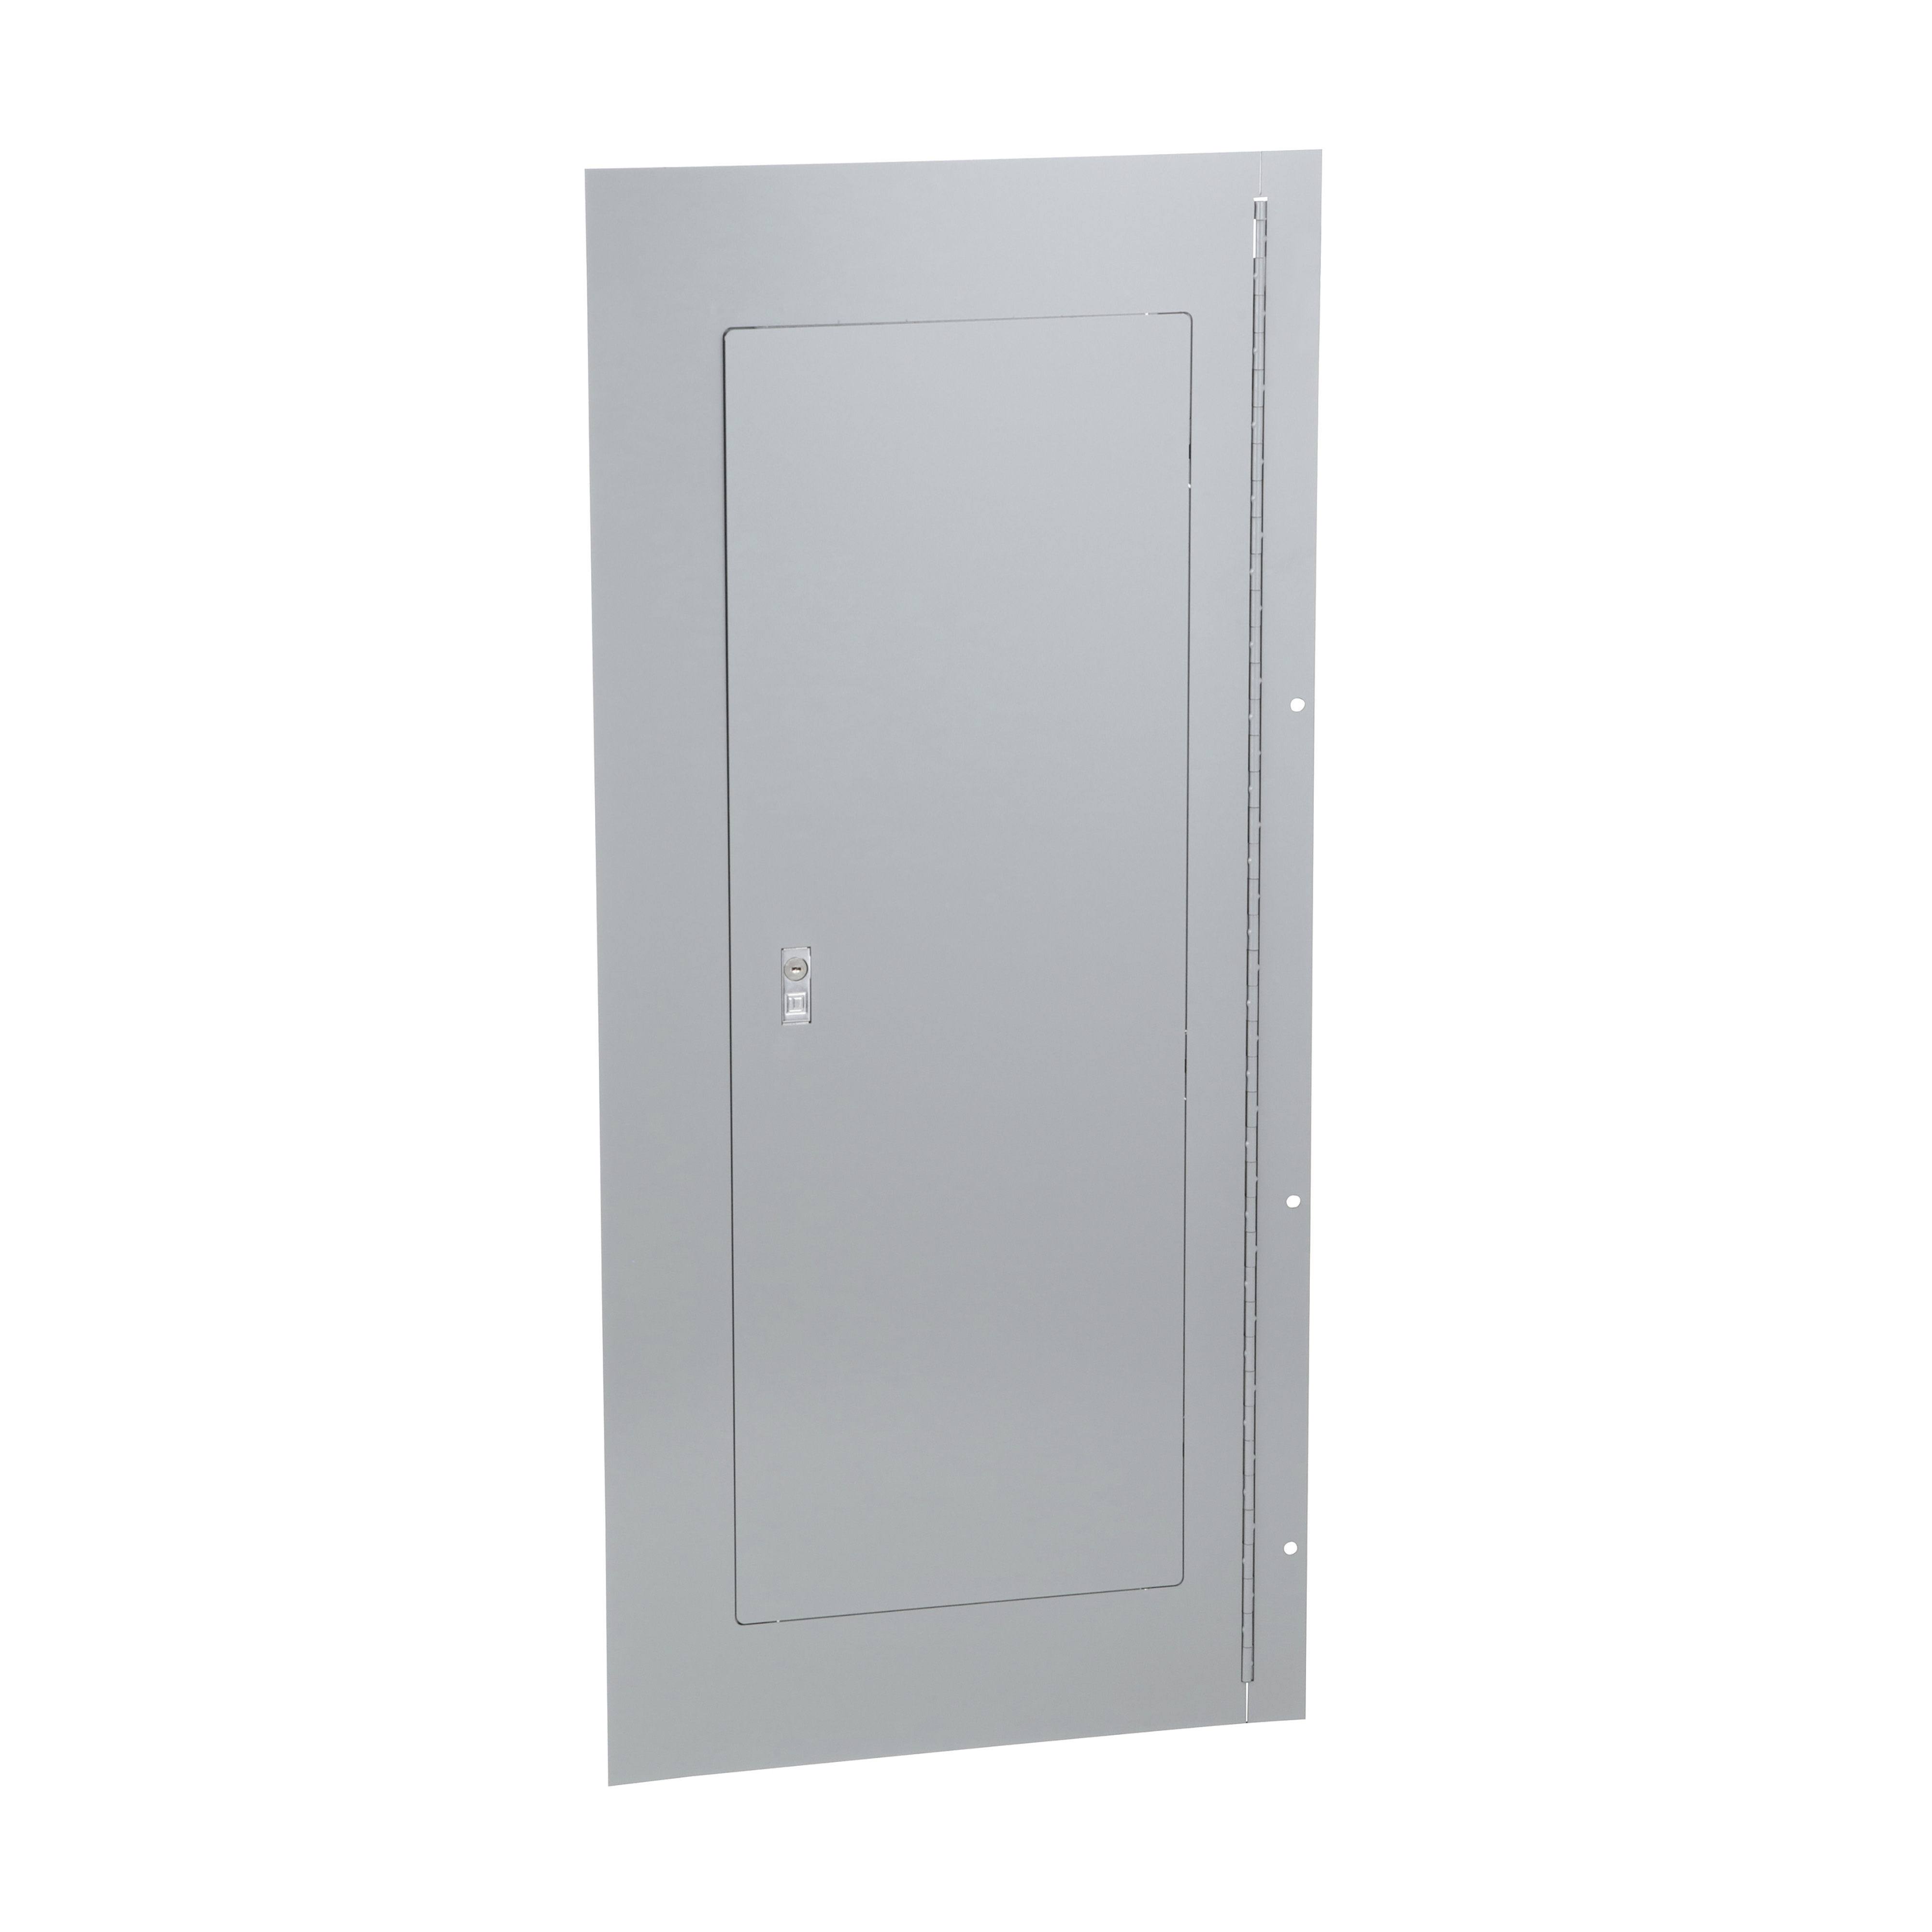 Enclosure cover, NQ and NF panelboards, NEMA 1, surface, hinged, 20in W x 44in H